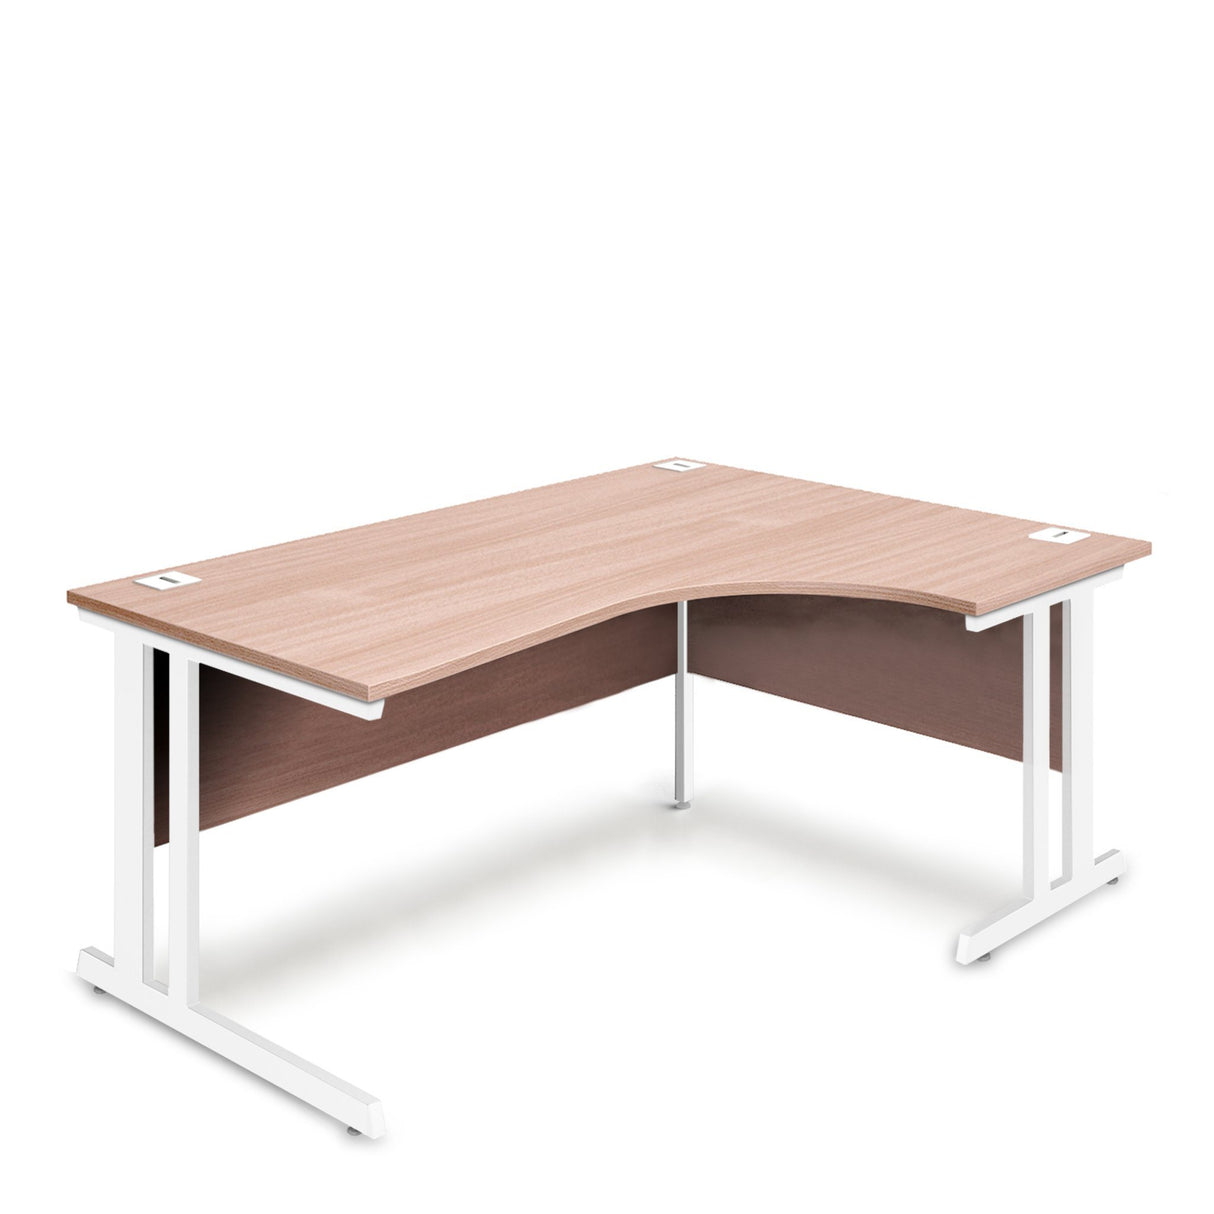 Nautilus Designs Aspire - Ergonomic Right Hand Corner Desk - 1400mm Wide with Cable Management & Modesty Panels